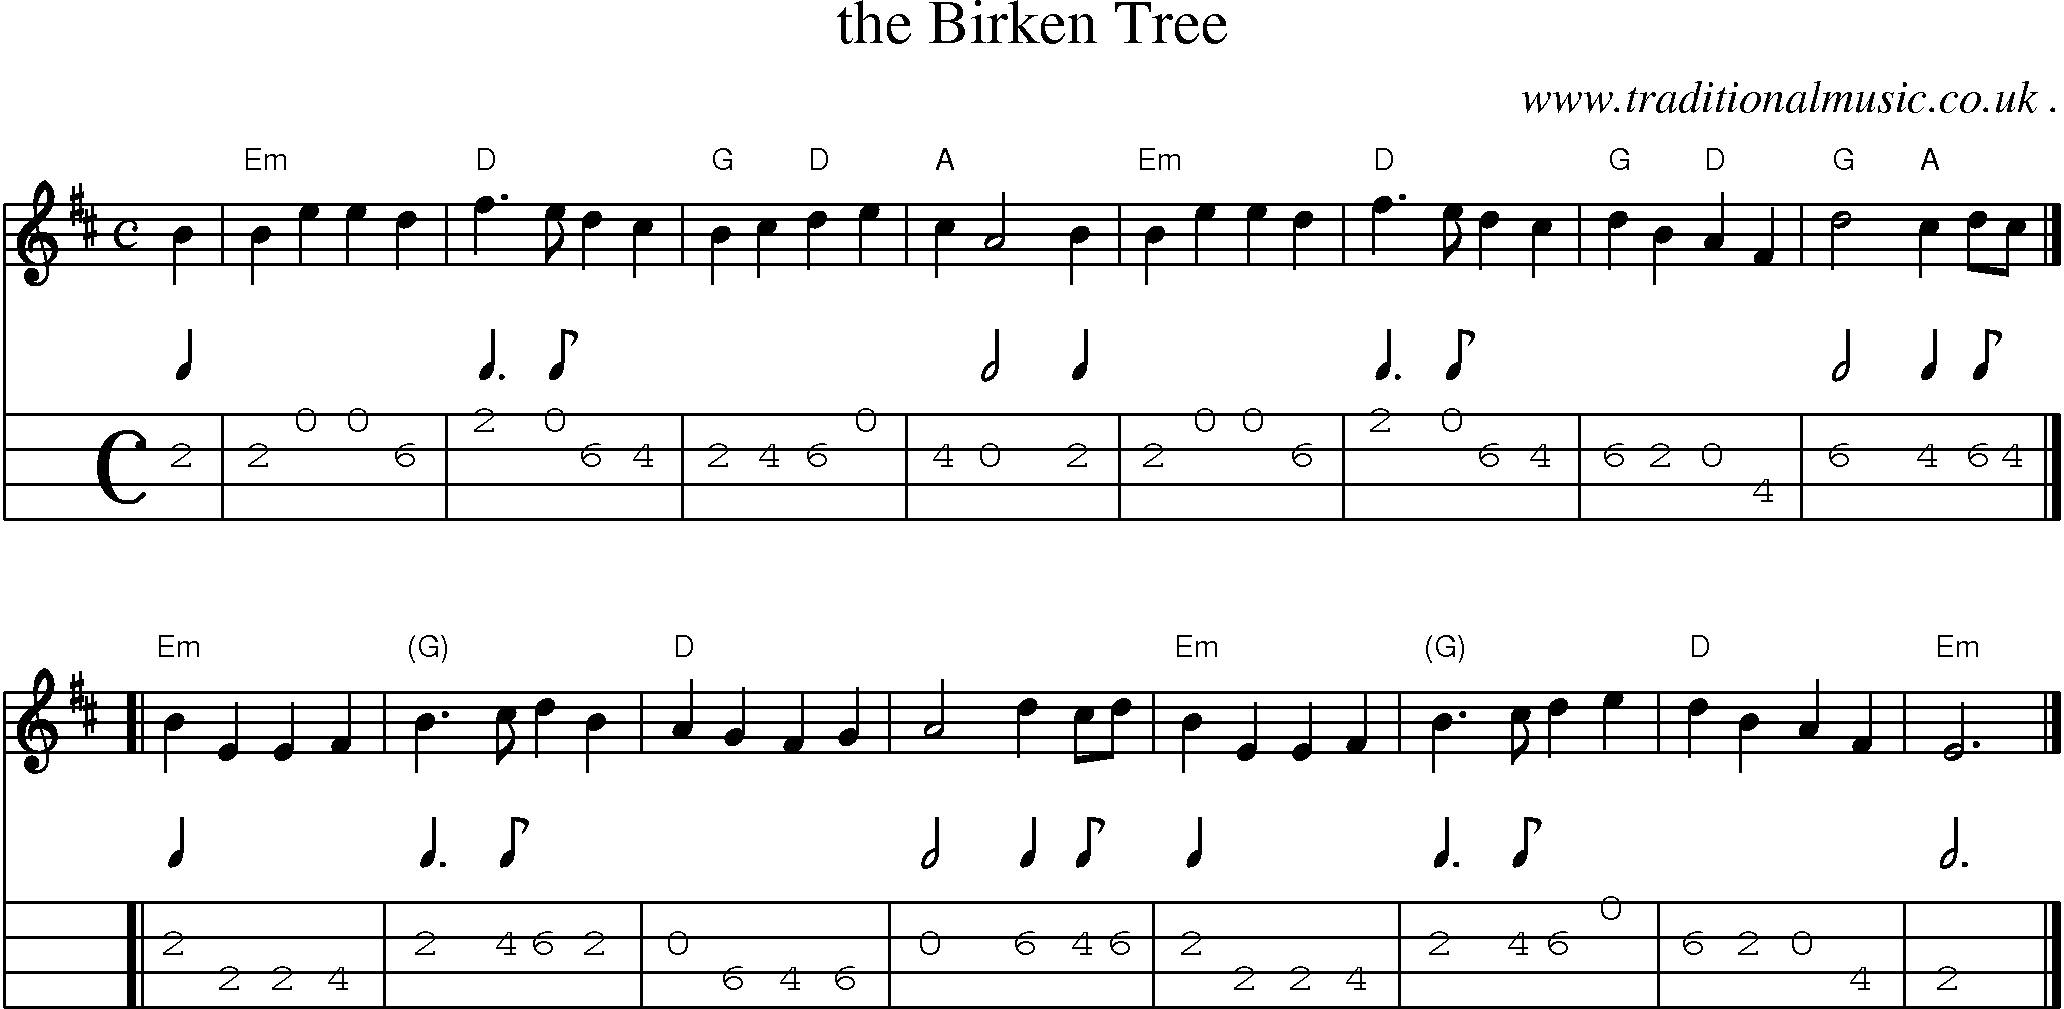 Sheet-music  score, Chords and Mandolin Tabs for The Birken Tree